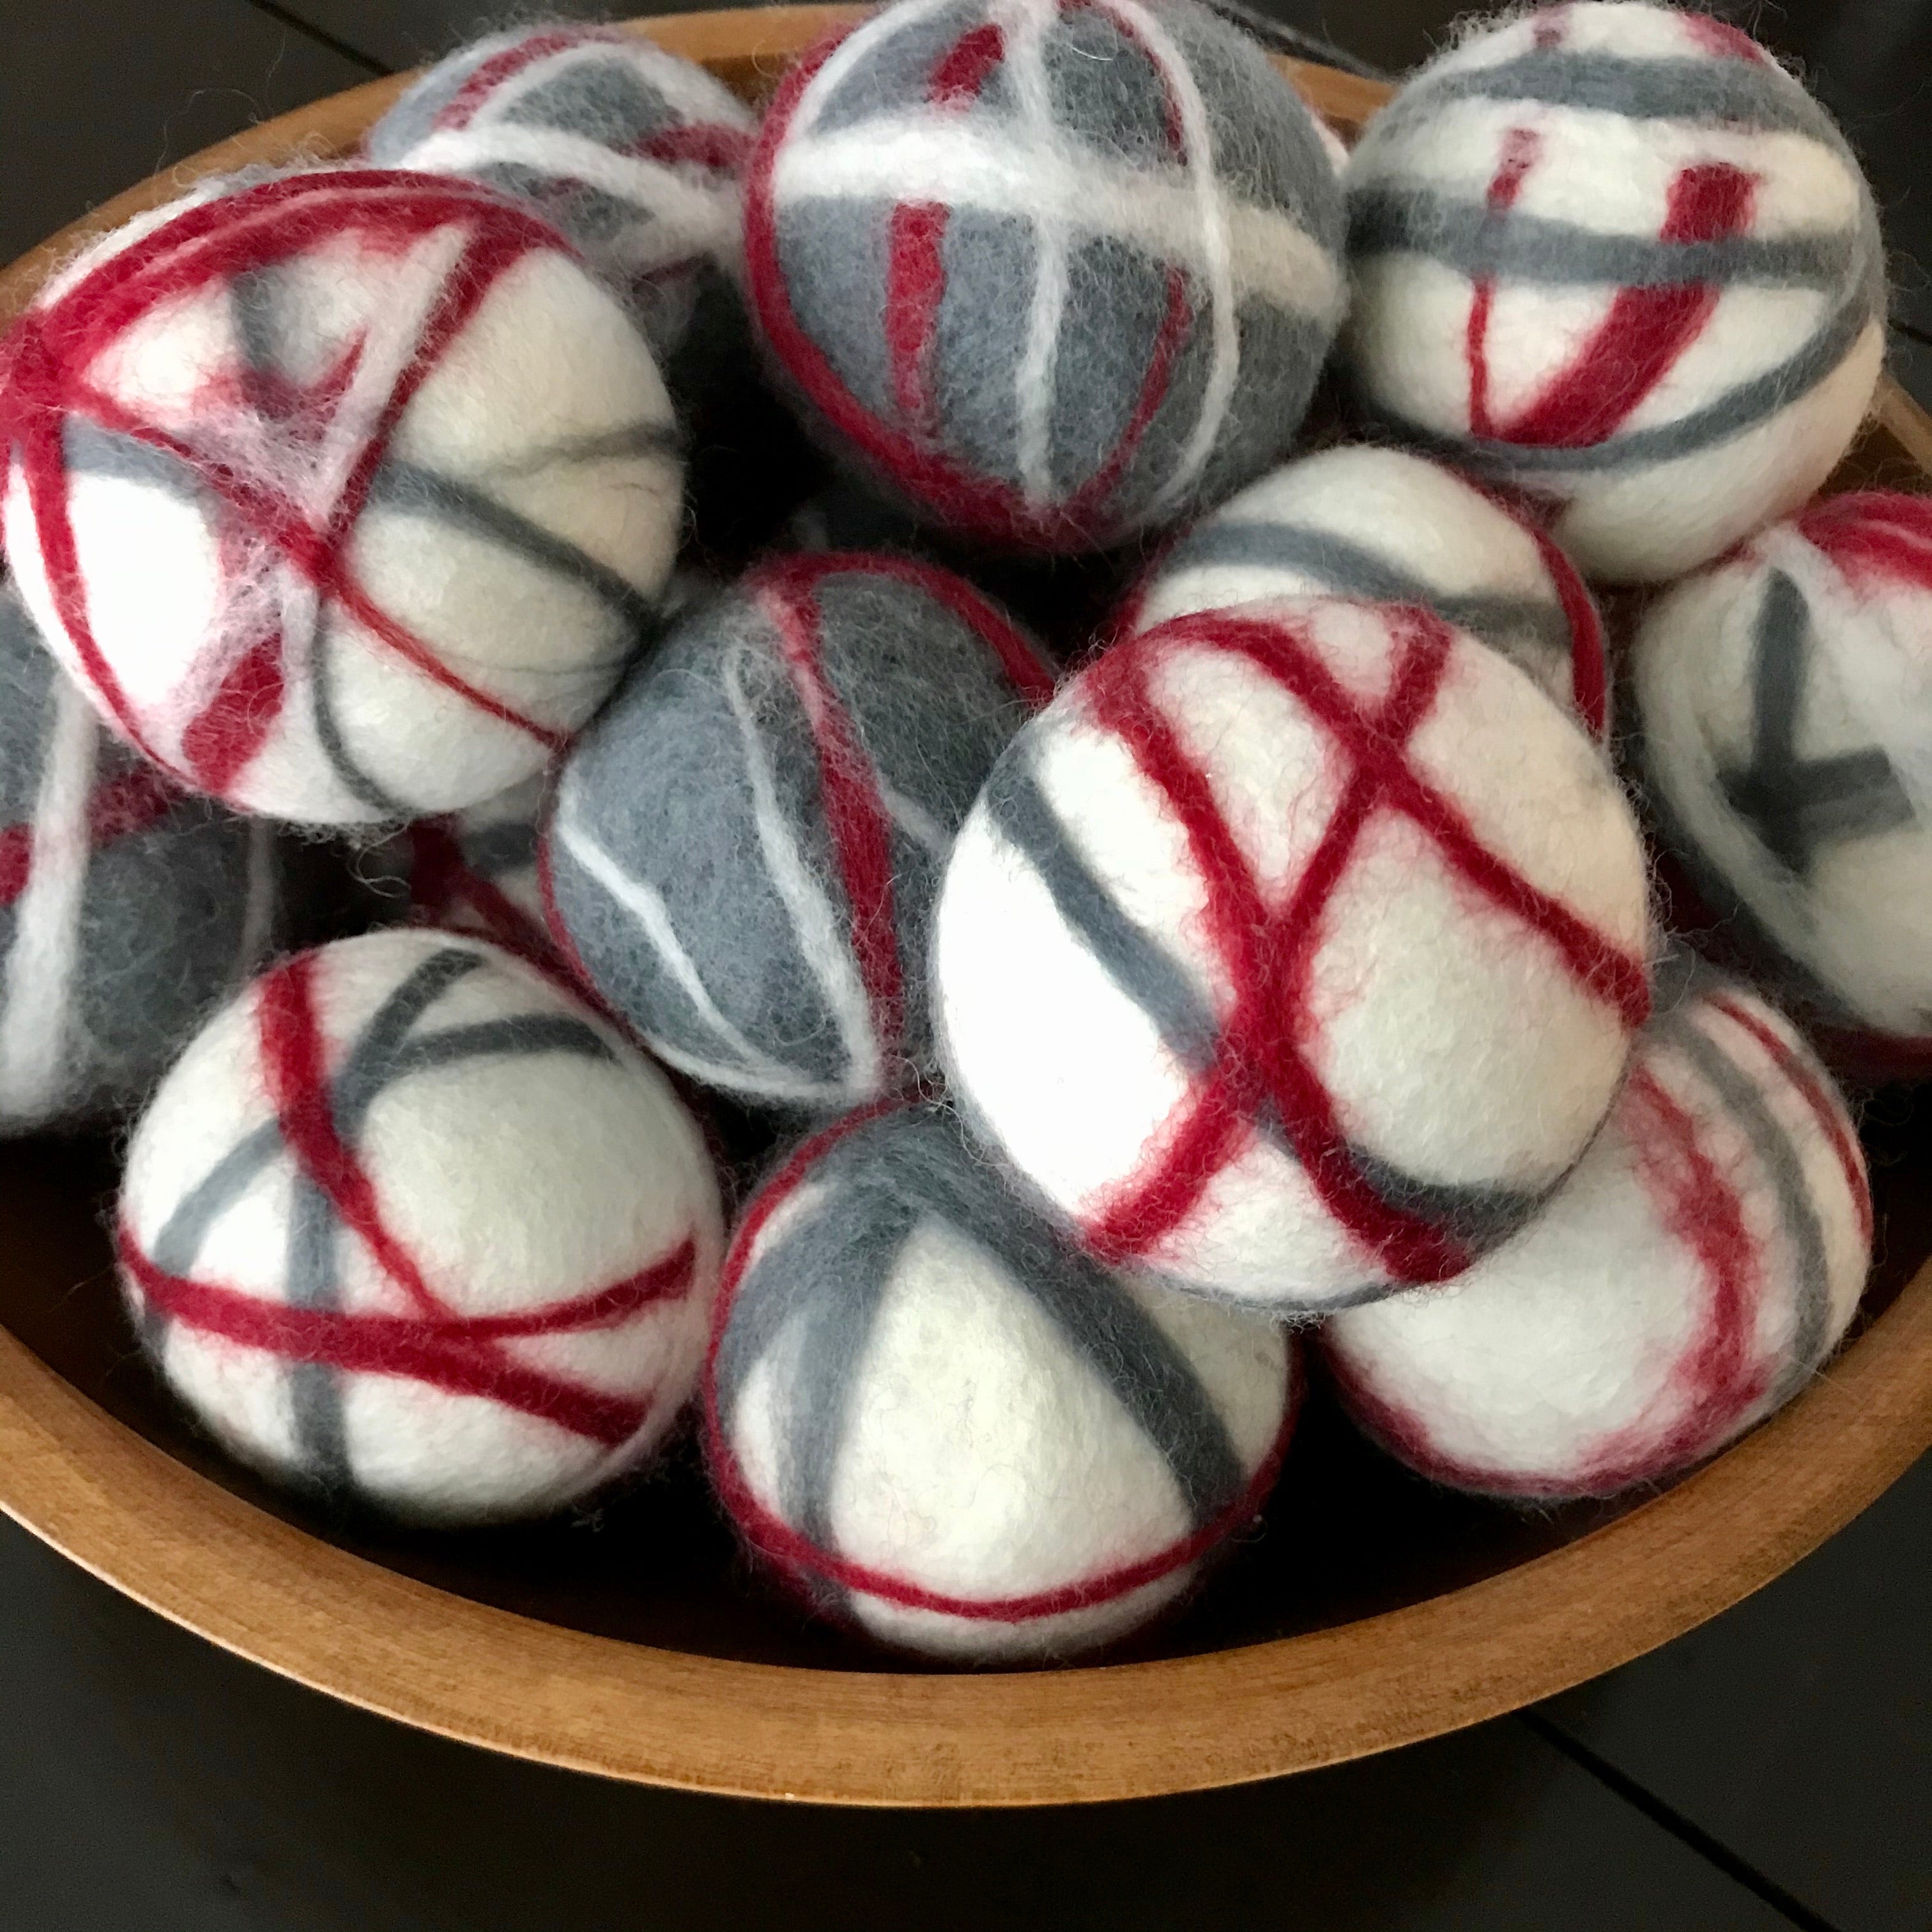 large canadian made red, white and grey 100 percent wool dryer balls sold individually or in a set of 3 in a cloth bag